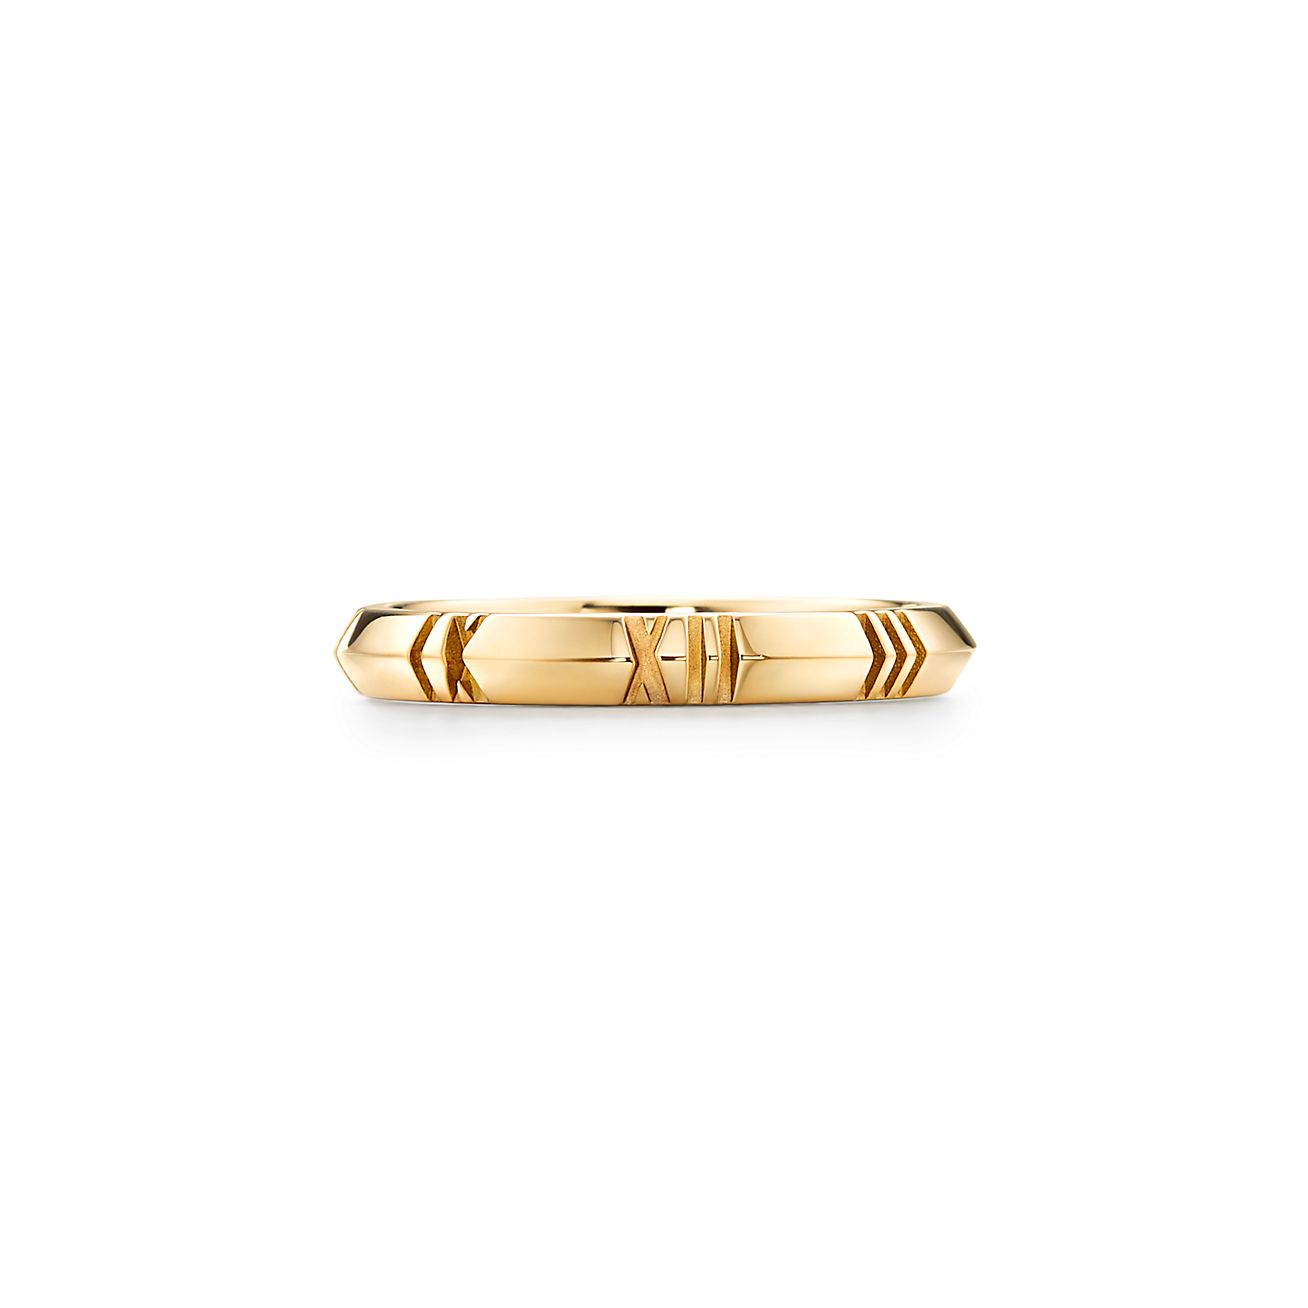 Atlas® X Closed Narrow Ring in Yellow Gold, 3 mm Wide. | Tiffany & Co.